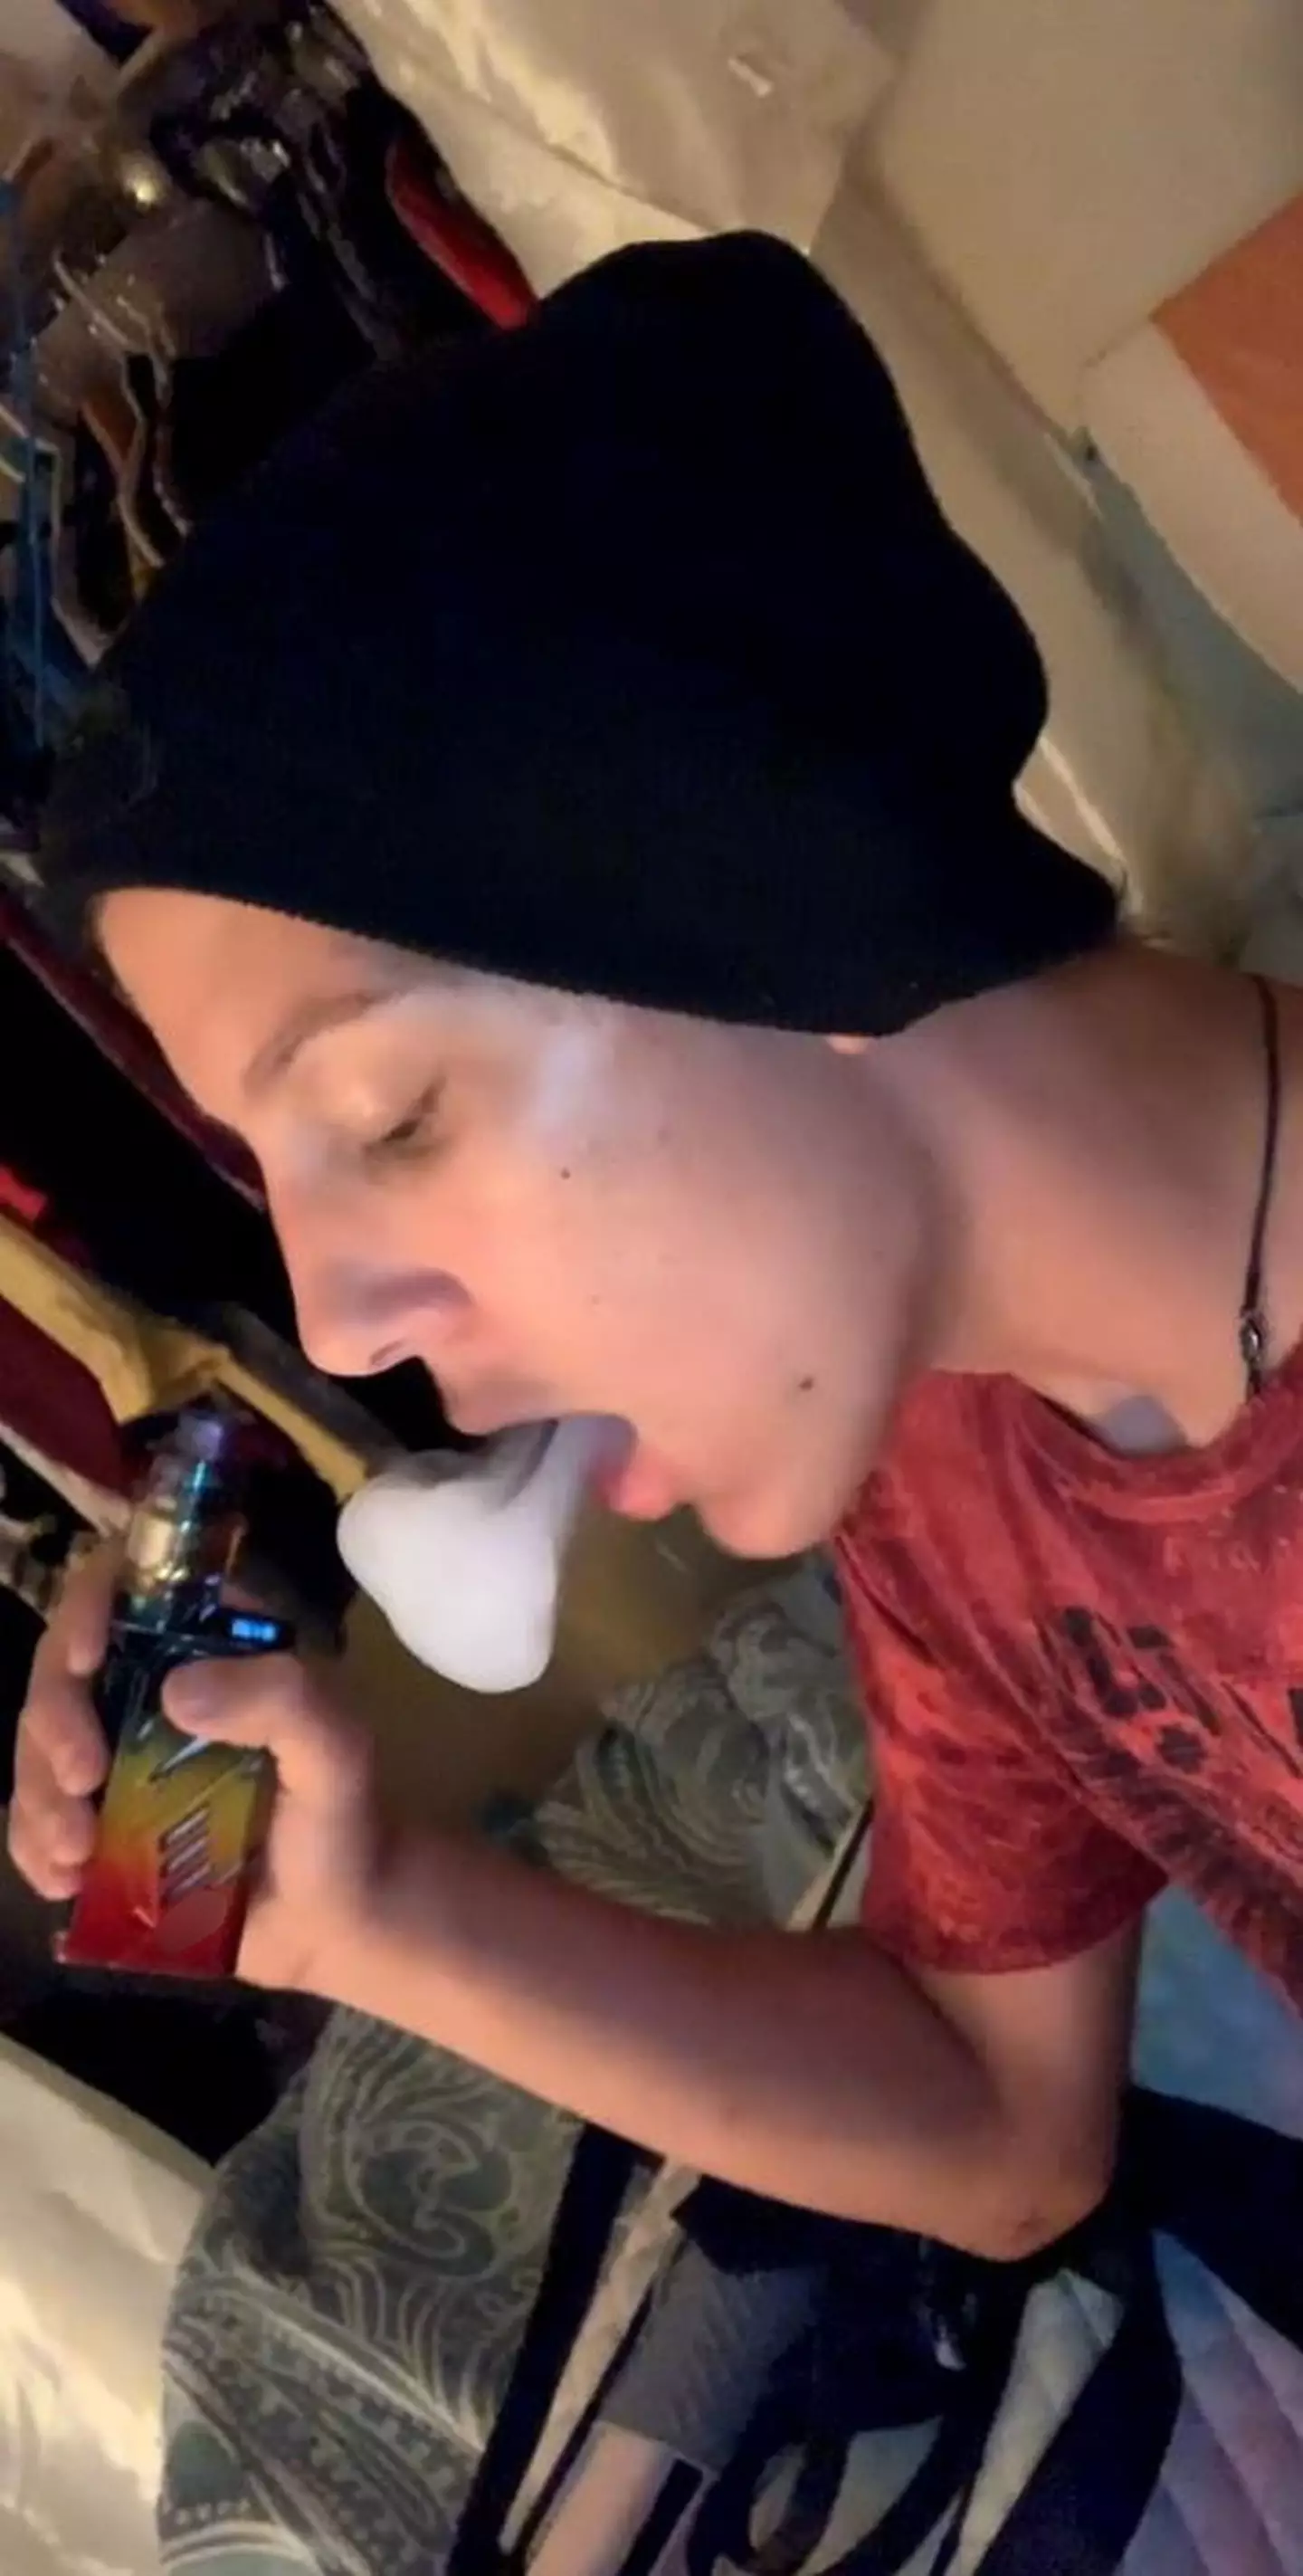 Draven Hatfield started vaping when he was 13.